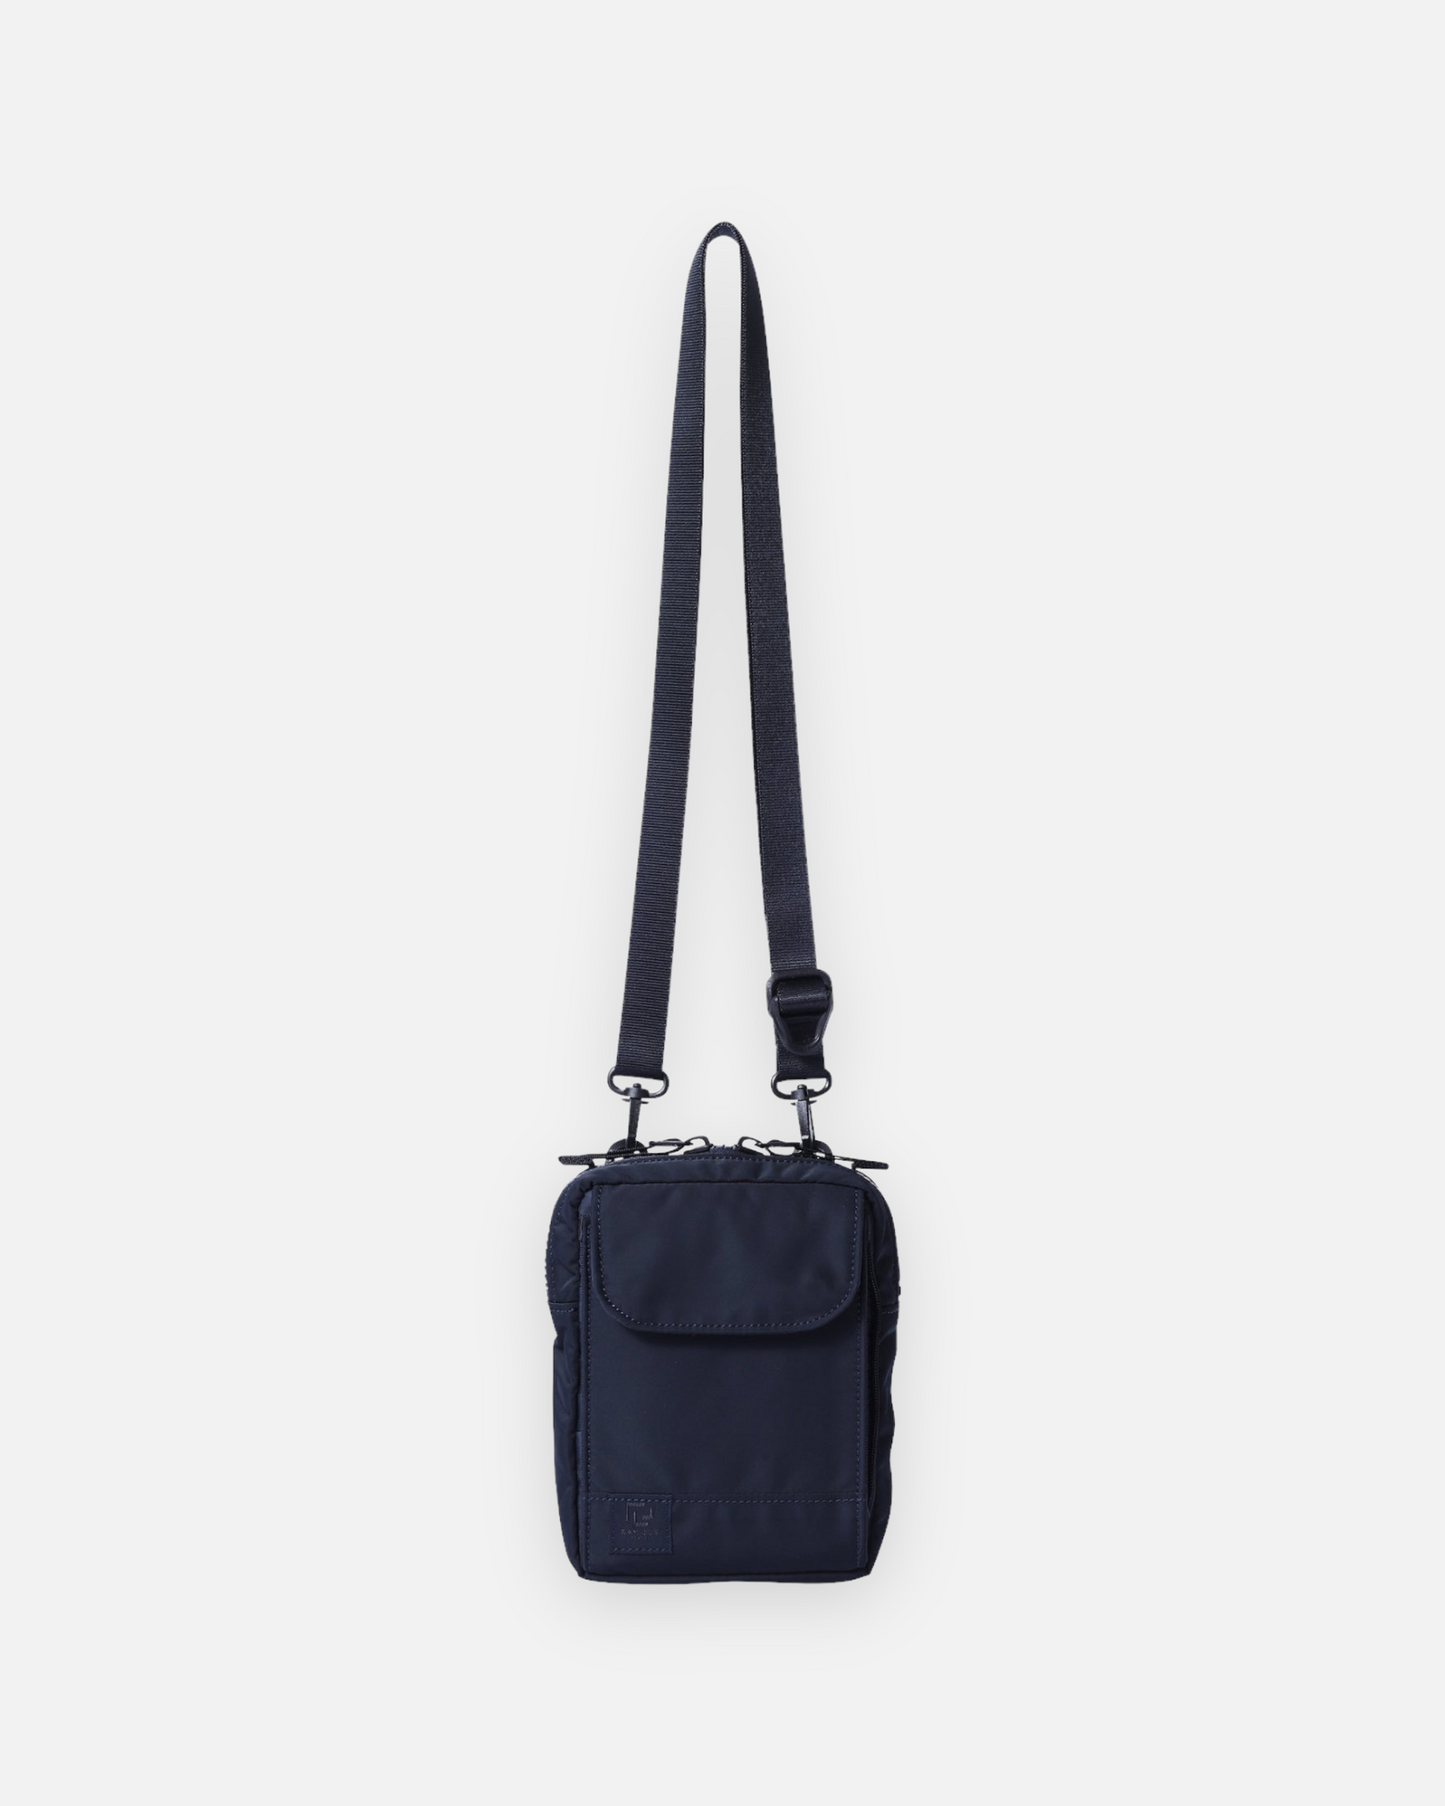 RAMIDUS WALLET POUCH (NAVY)